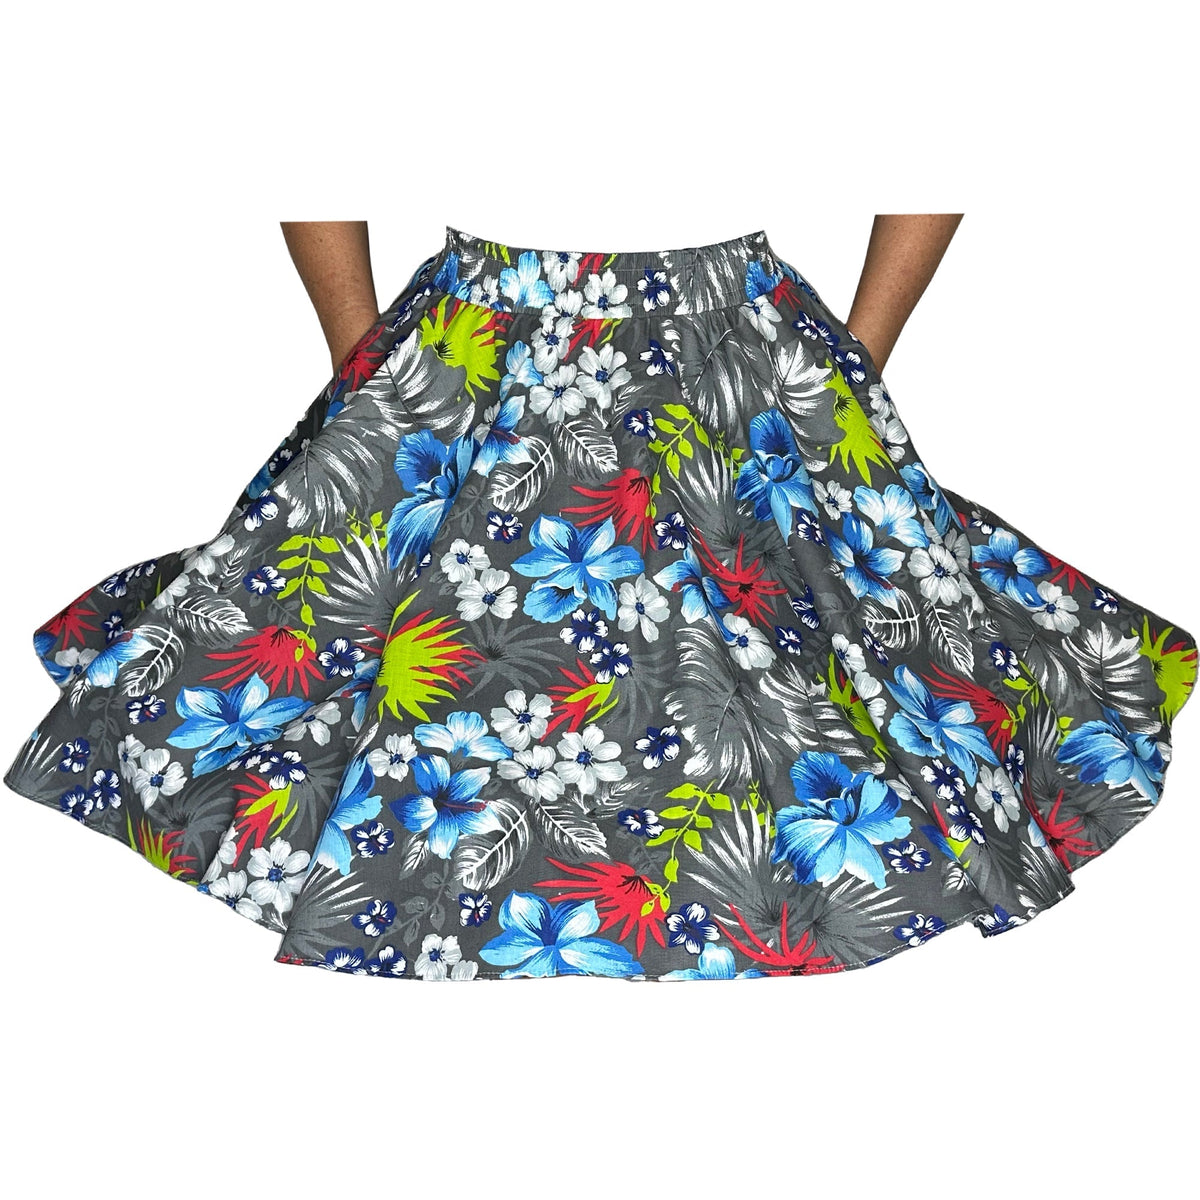 Square Up Fashions&#39; Tropical Hawaiian Square Dance Skirt with tropical palm leaves.